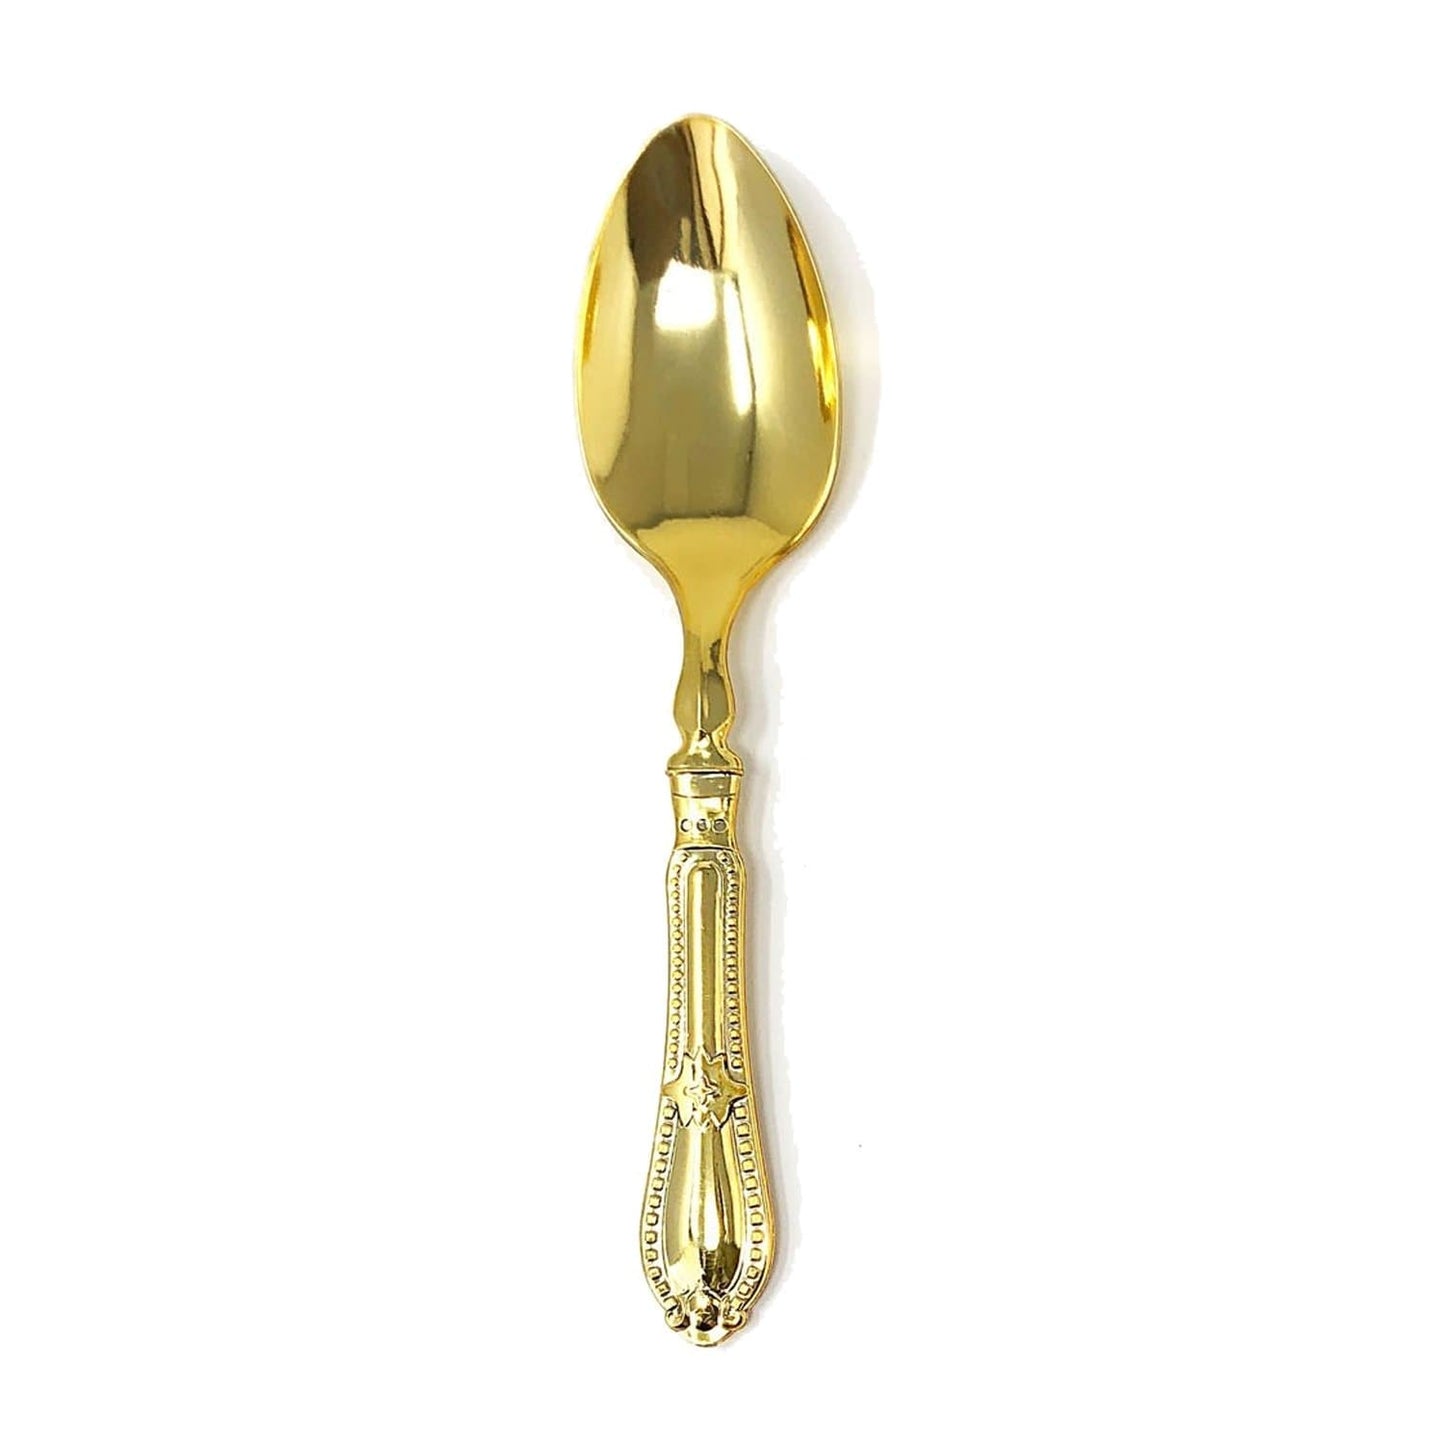 SALE Luxury Baroque Collection Gold Tee Spoons 12 count Tablesettings Decorline   